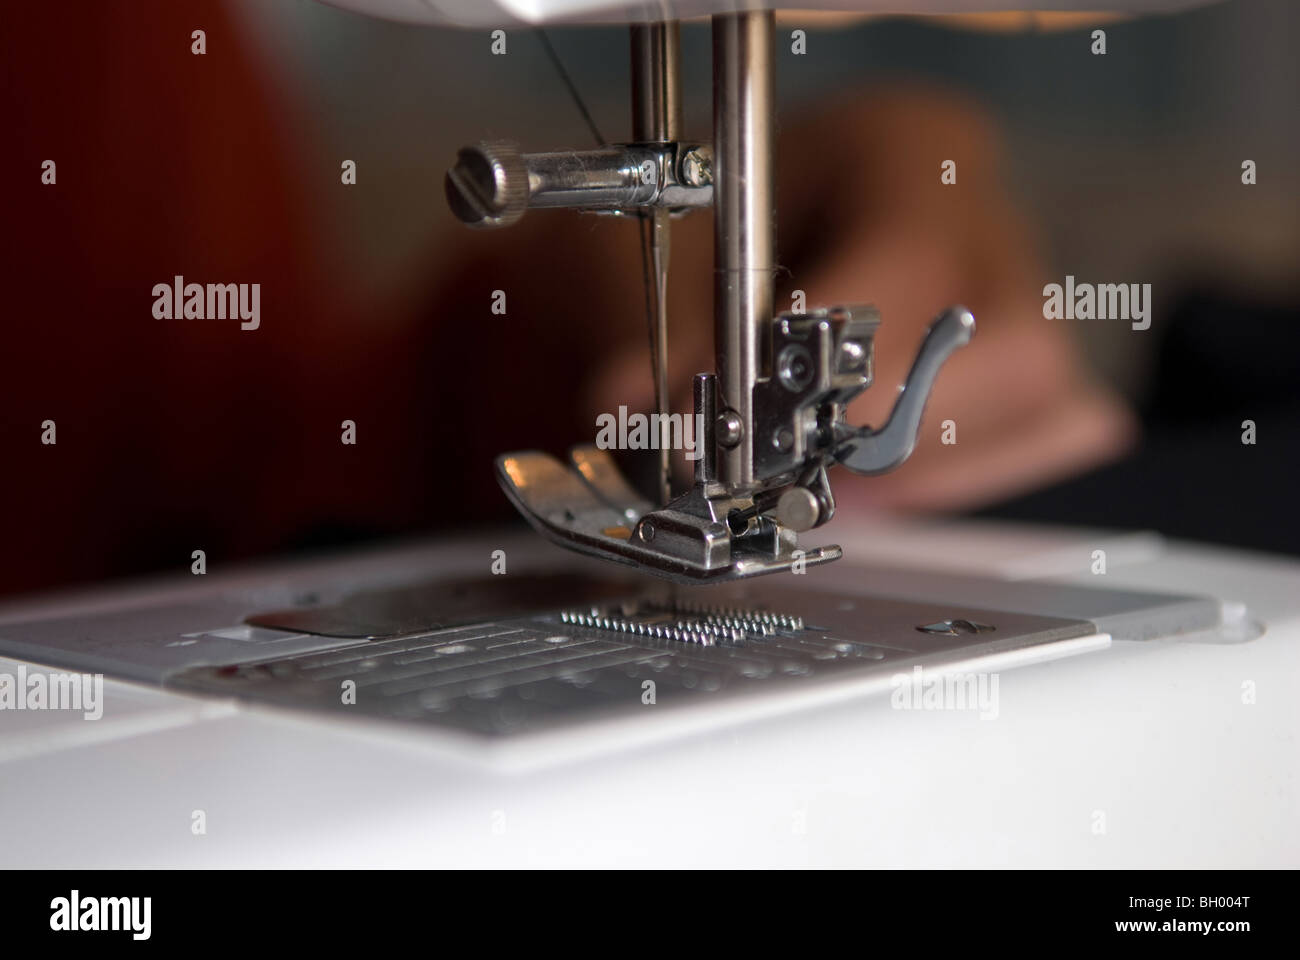 Sewing hands Stock Photo